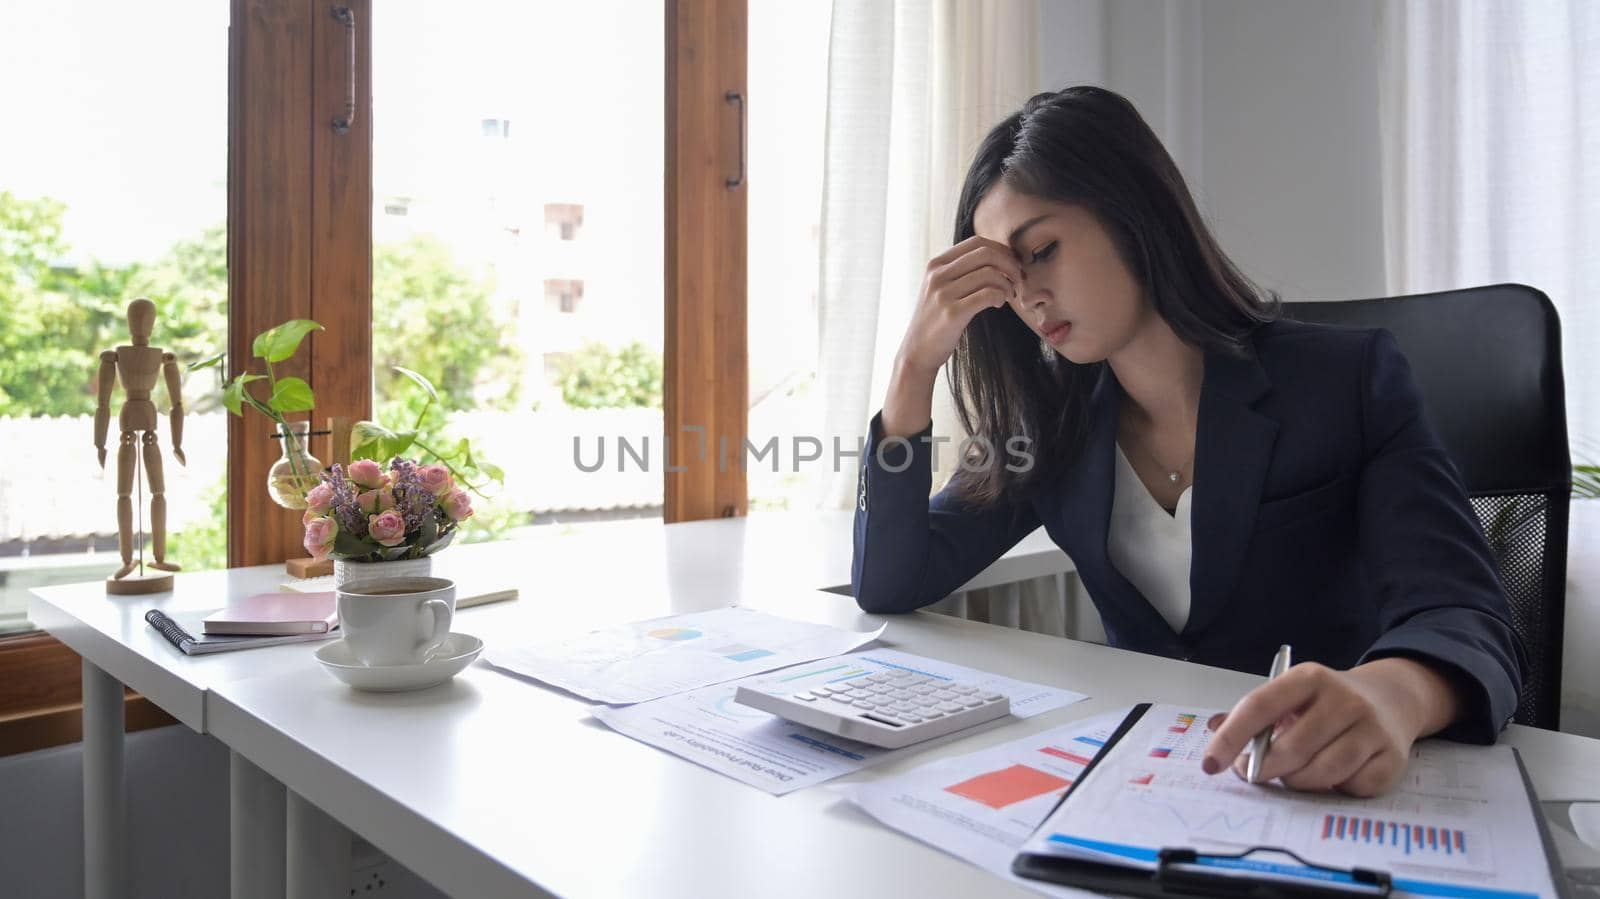 Young businesswoman looking worried, tired and overwhelmed while working at office desk.